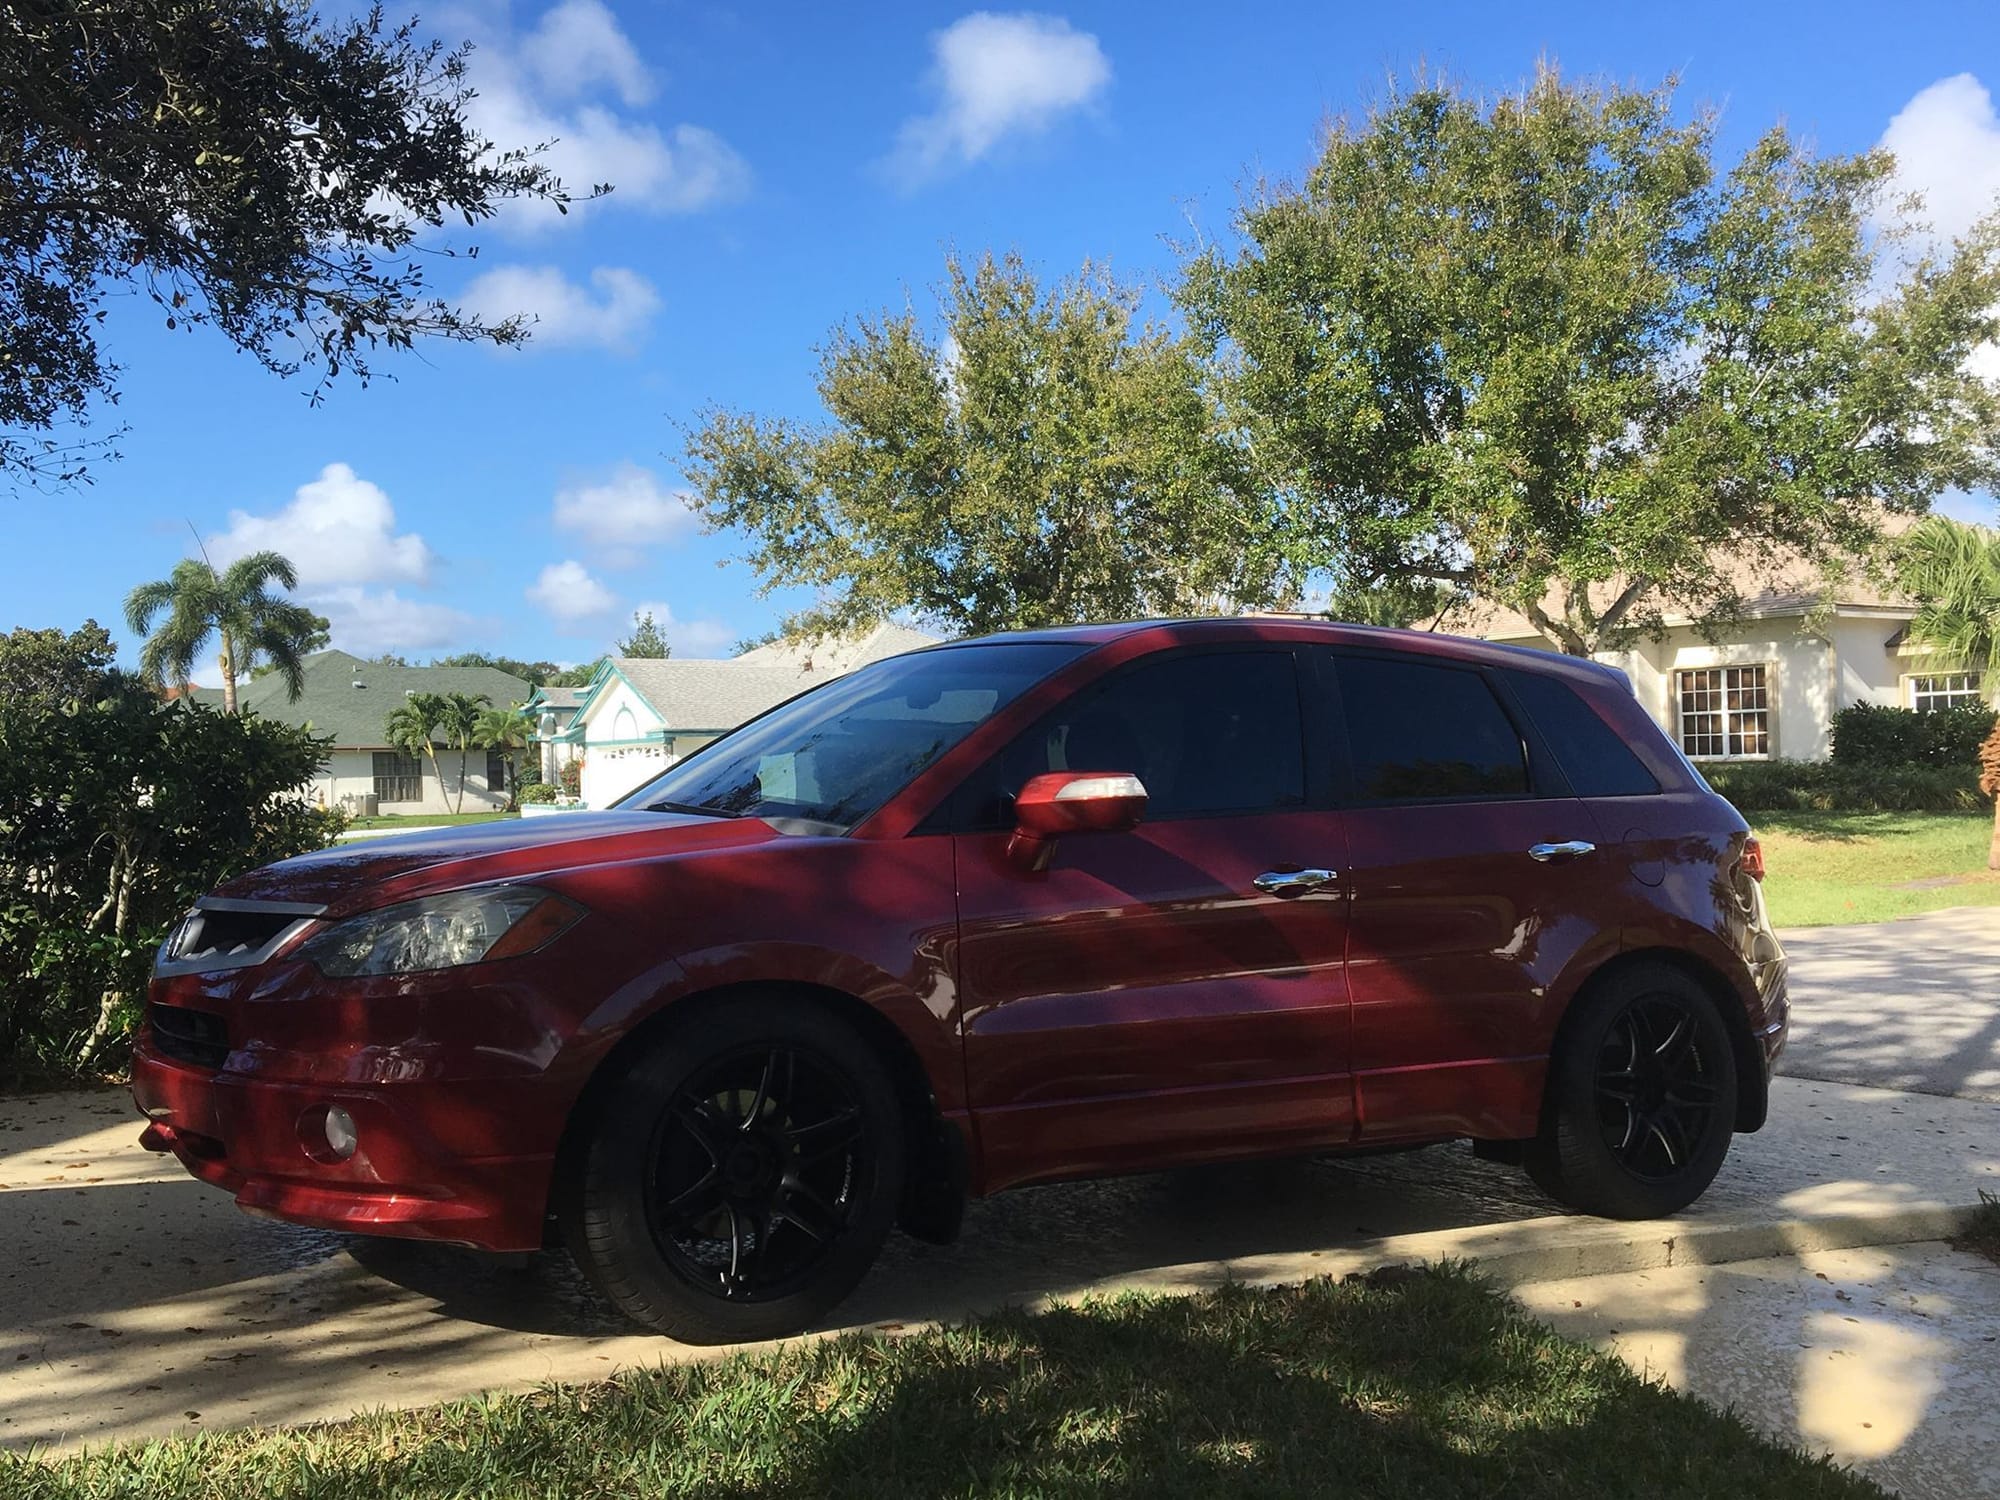 Wheels and Tires/Axles - FS: WedsSport SA-60M wheels - Used - 2007 to 2012 Acura RDX - St. Ptersburg, FL 33716, United States